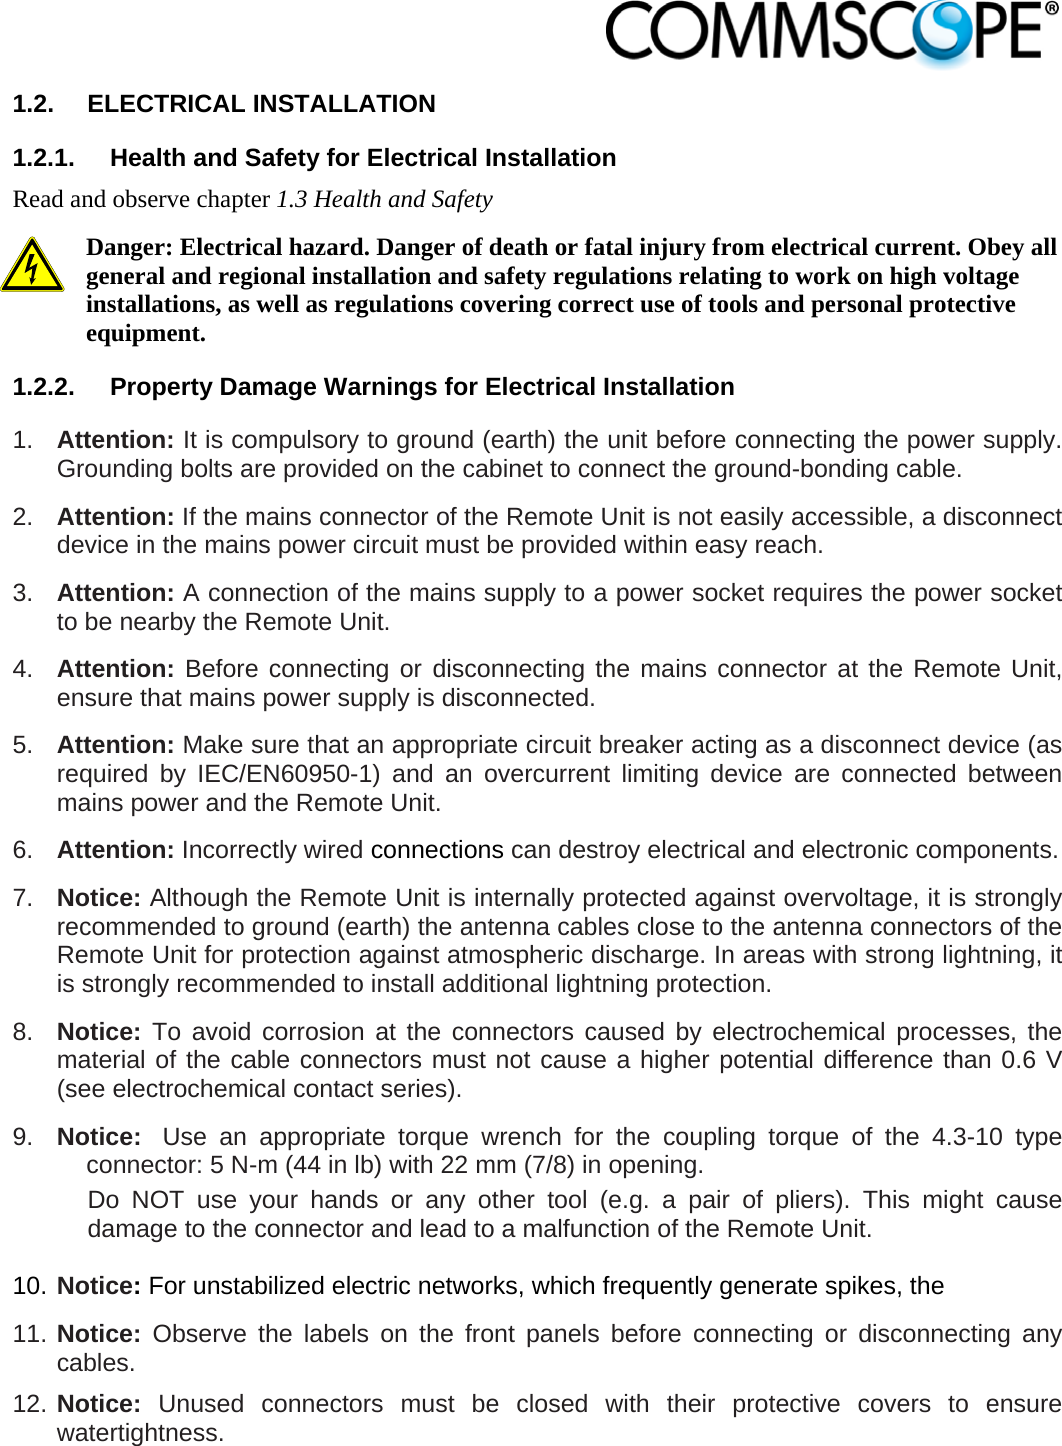                            1.2. ELECTRICAL INSTALLATION 1.2.1.  Health and Safety for Electrical Installation Read and observe chapter 1.3 Health and Safety Danger: Electrical hazard. Danger of death or fatal injury from electrical current. Obey all general and regional installation and safety regulations relating to work on high voltage installations, as well as regulations covering correct use of tools and personal protective equipment. 1.2.2.  Property Damage Warnings for Electrical Installation 1.  Attention: It is compulsory to ground (earth) the unit before connecting the power supply. Grounding bolts are provided on the cabinet to connect the ground-bonding cable.  2.  Attention: If the mains connector of the Remote Unit is not easily accessible, a disconnect device in the mains power circuit must be provided within easy reach. 3.  Attention: A connection of the mains supply to a power socket requires the power socket to be nearby the Remote Unit. 4.  Attention: Before connecting or disconnecting the mains connector at the Remote Unit, ensure that mains power supply is disconnected. 5.  Attention: Make sure that an appropriate circuit breaker acting as a disconnect device (as required by IEC/EN60950-1) and an overcurrent limiting device are connected between mains power and the Remote Unit. 6.  Attention: Incorrectly wired connections can destroy electrical and electronic components.  7.  Notice: Although the Remote Unit is internally protected against overvoltage, it is strongly recommended to ground (earth) the antenna cables close to the antenna connectors of the Remote Unit for protection against atmospheric discharge. In areas with strong lightning, it is strongly recommended to install additional lightning protection. 8.  Notice: To avoid corrosion at the connectors caused by electrochemical processes, the material of the cable connectors must not cause a higher potential difference than 0.6 V (see electrochemical contact series). 9.  Notice:  Use an appropriate torque wrench for the coupling torque of the 4.3-10 type connector: 5 N-m (44 in lb) with 22 mm (7/8) in opening. Do NOT use your hands or any other tool (e.g. a pair of pliers). This might cause damage to the connector and lead to a malfunction of the Remote Unit.  10. Notice: For unstabilized electric networks, which frequently generate spikes, the  11. Notice: Observe the labels on the front panels before connecting or disconnecting any cables. 12. Notice: Unused connectors must be closed with their protective covers to ensure watertightness. 